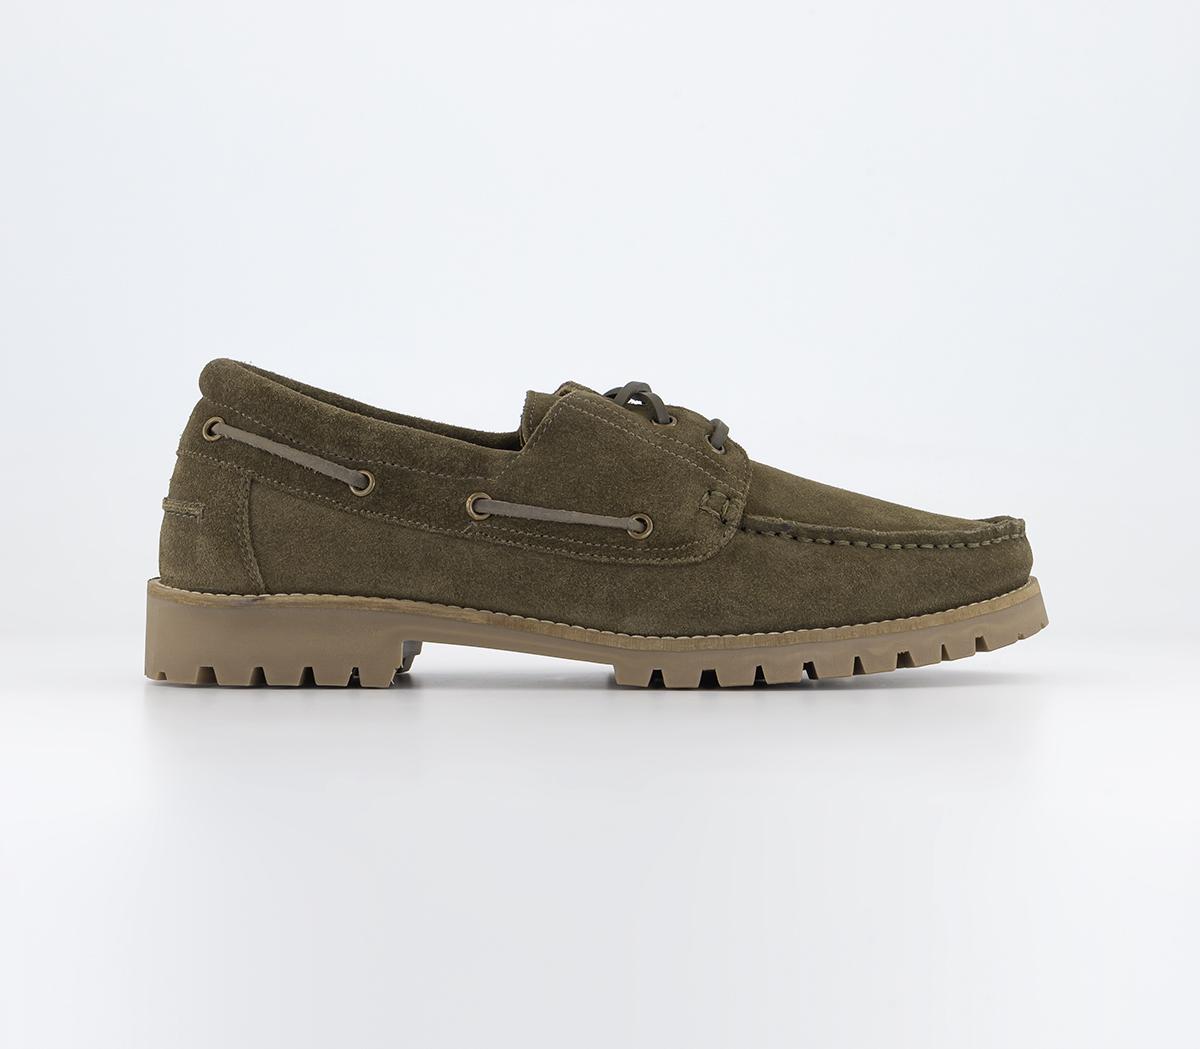 Colorado Cleated Suede Boat Shoes Khaki Suede